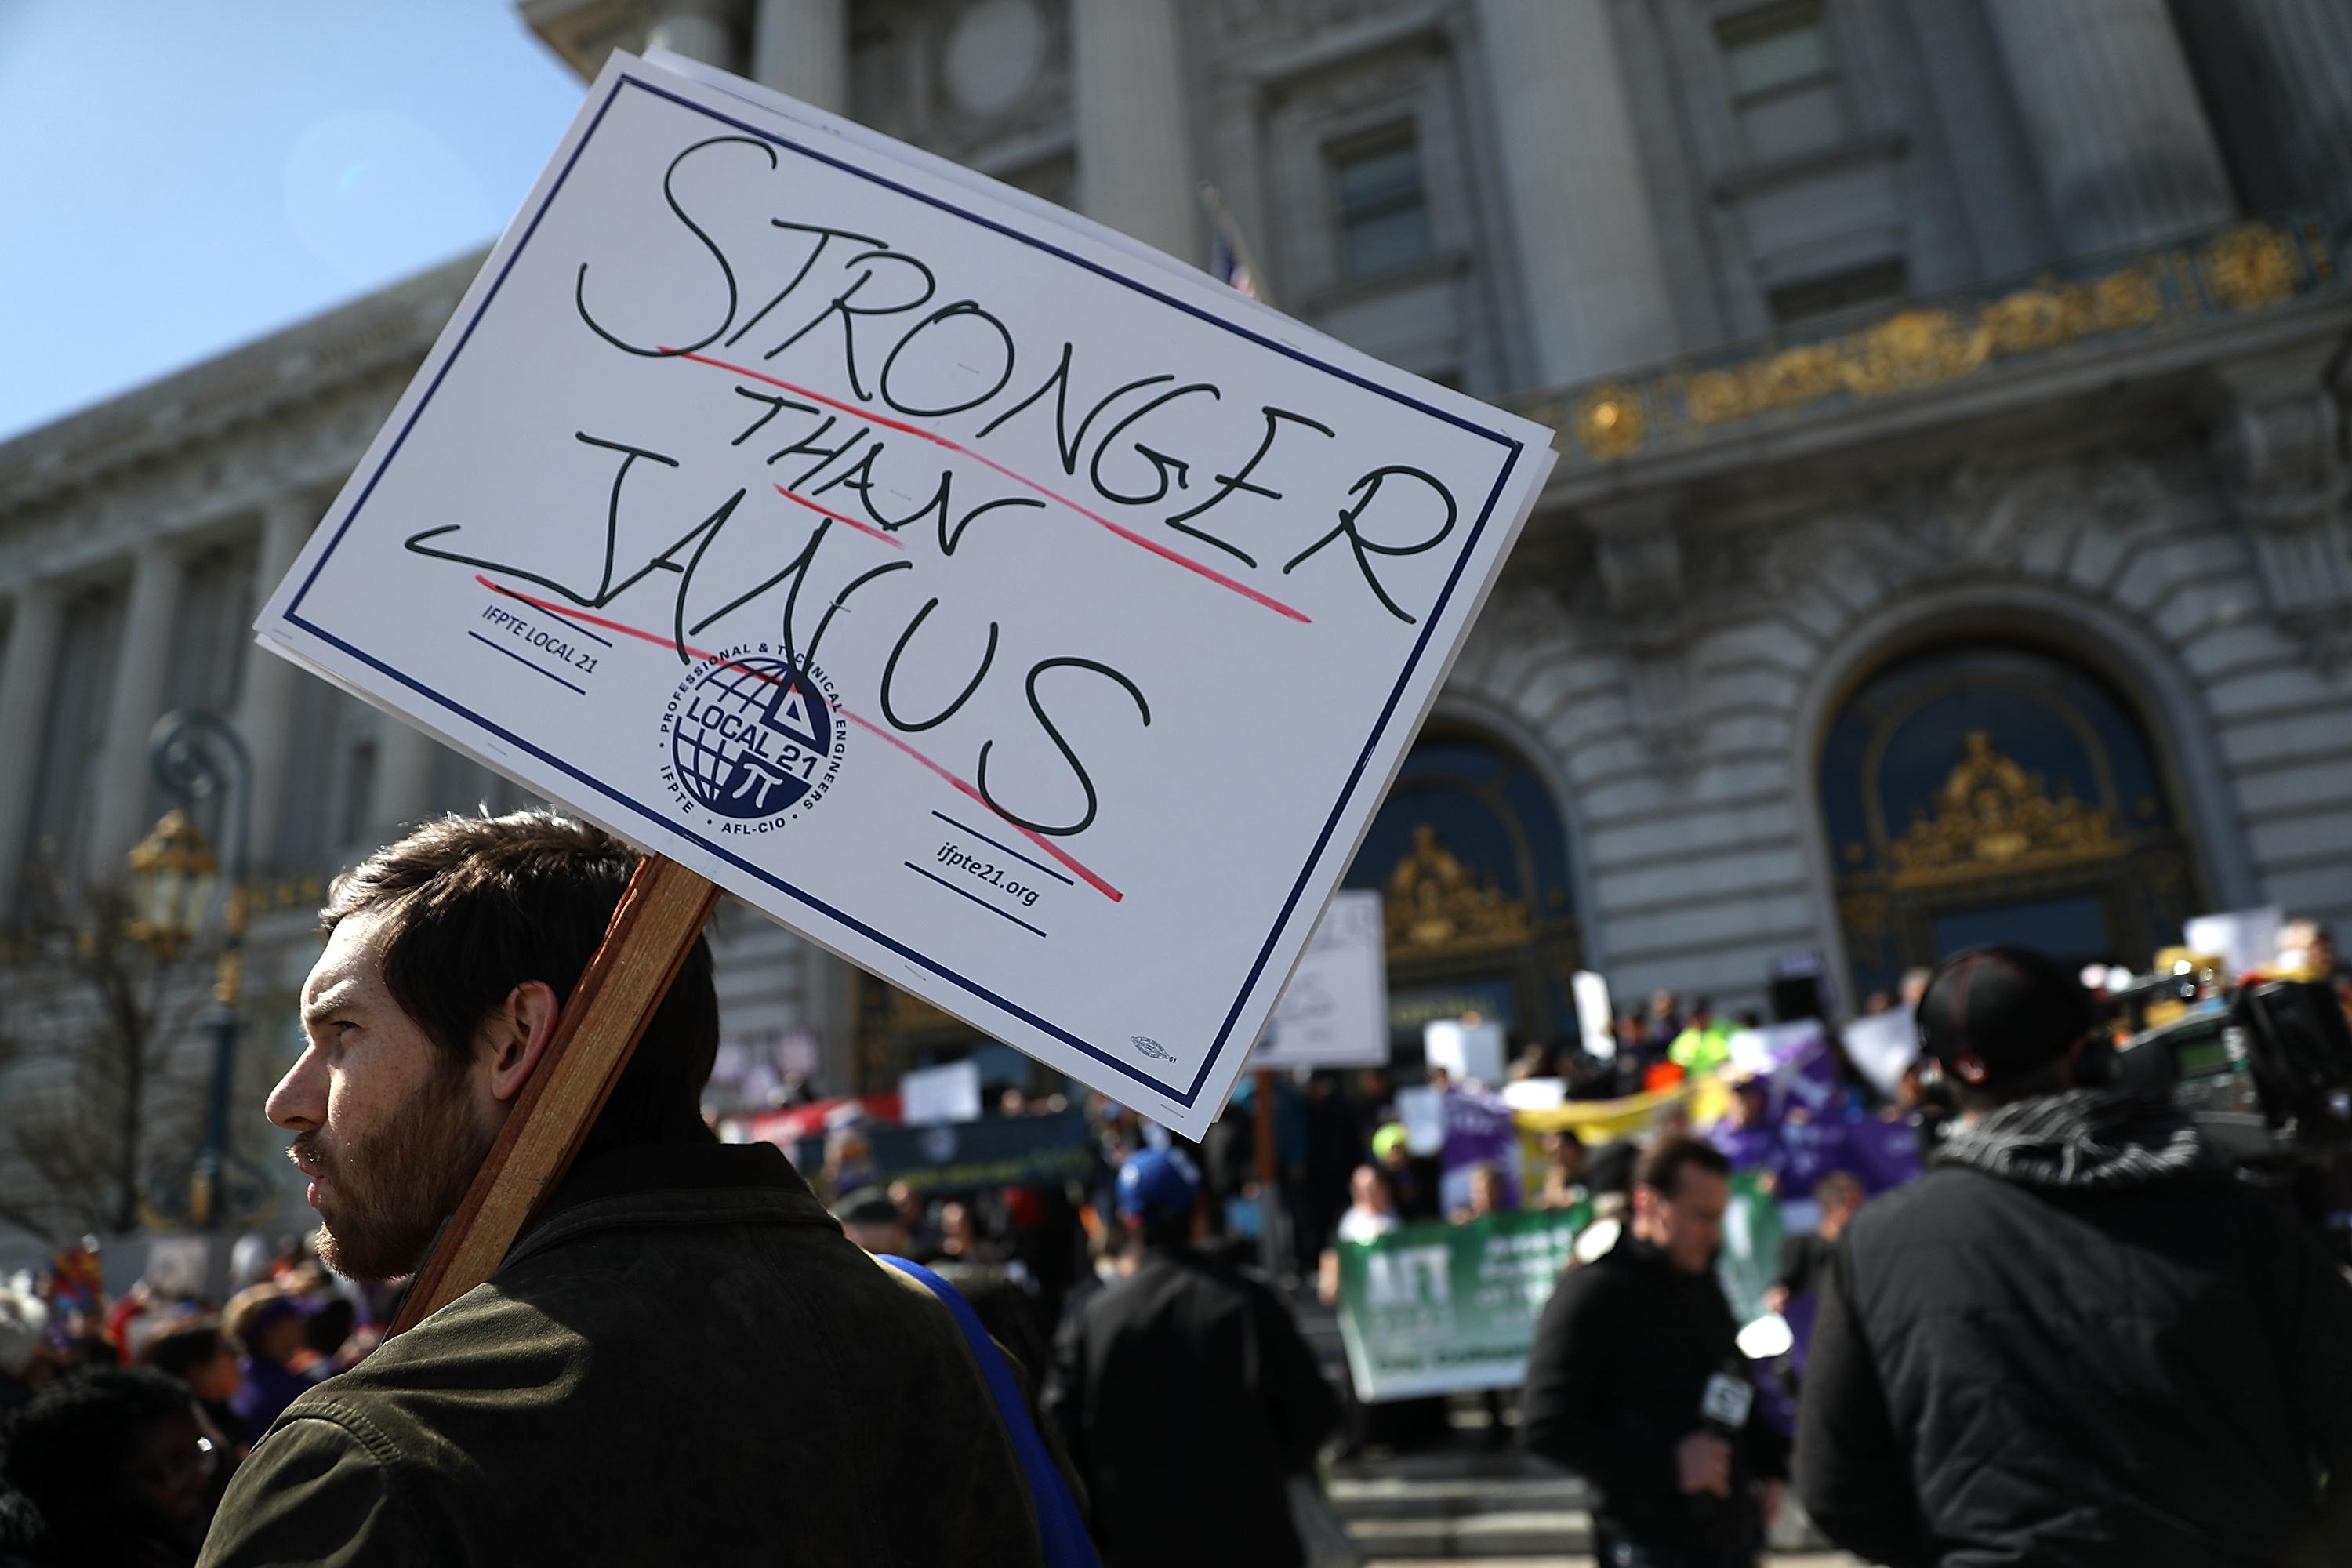 SAN FRANCISCO, CA - FEBRUARY 26:  Union members hold signs during a rally outside of San Francisco City Hall on February 26, 2018 in San Francisco, California.  Hundreds of union members held a rally outside of San Francisco City Hall as the US Supreme Court begins to hear oral arguments in the Janus V. AFSCME case that union memebers and supporters claim would limit their right to union representation by allowing members to not pay dues but still receive representation.  (Photo by Justin Sullivan/Getty Images)